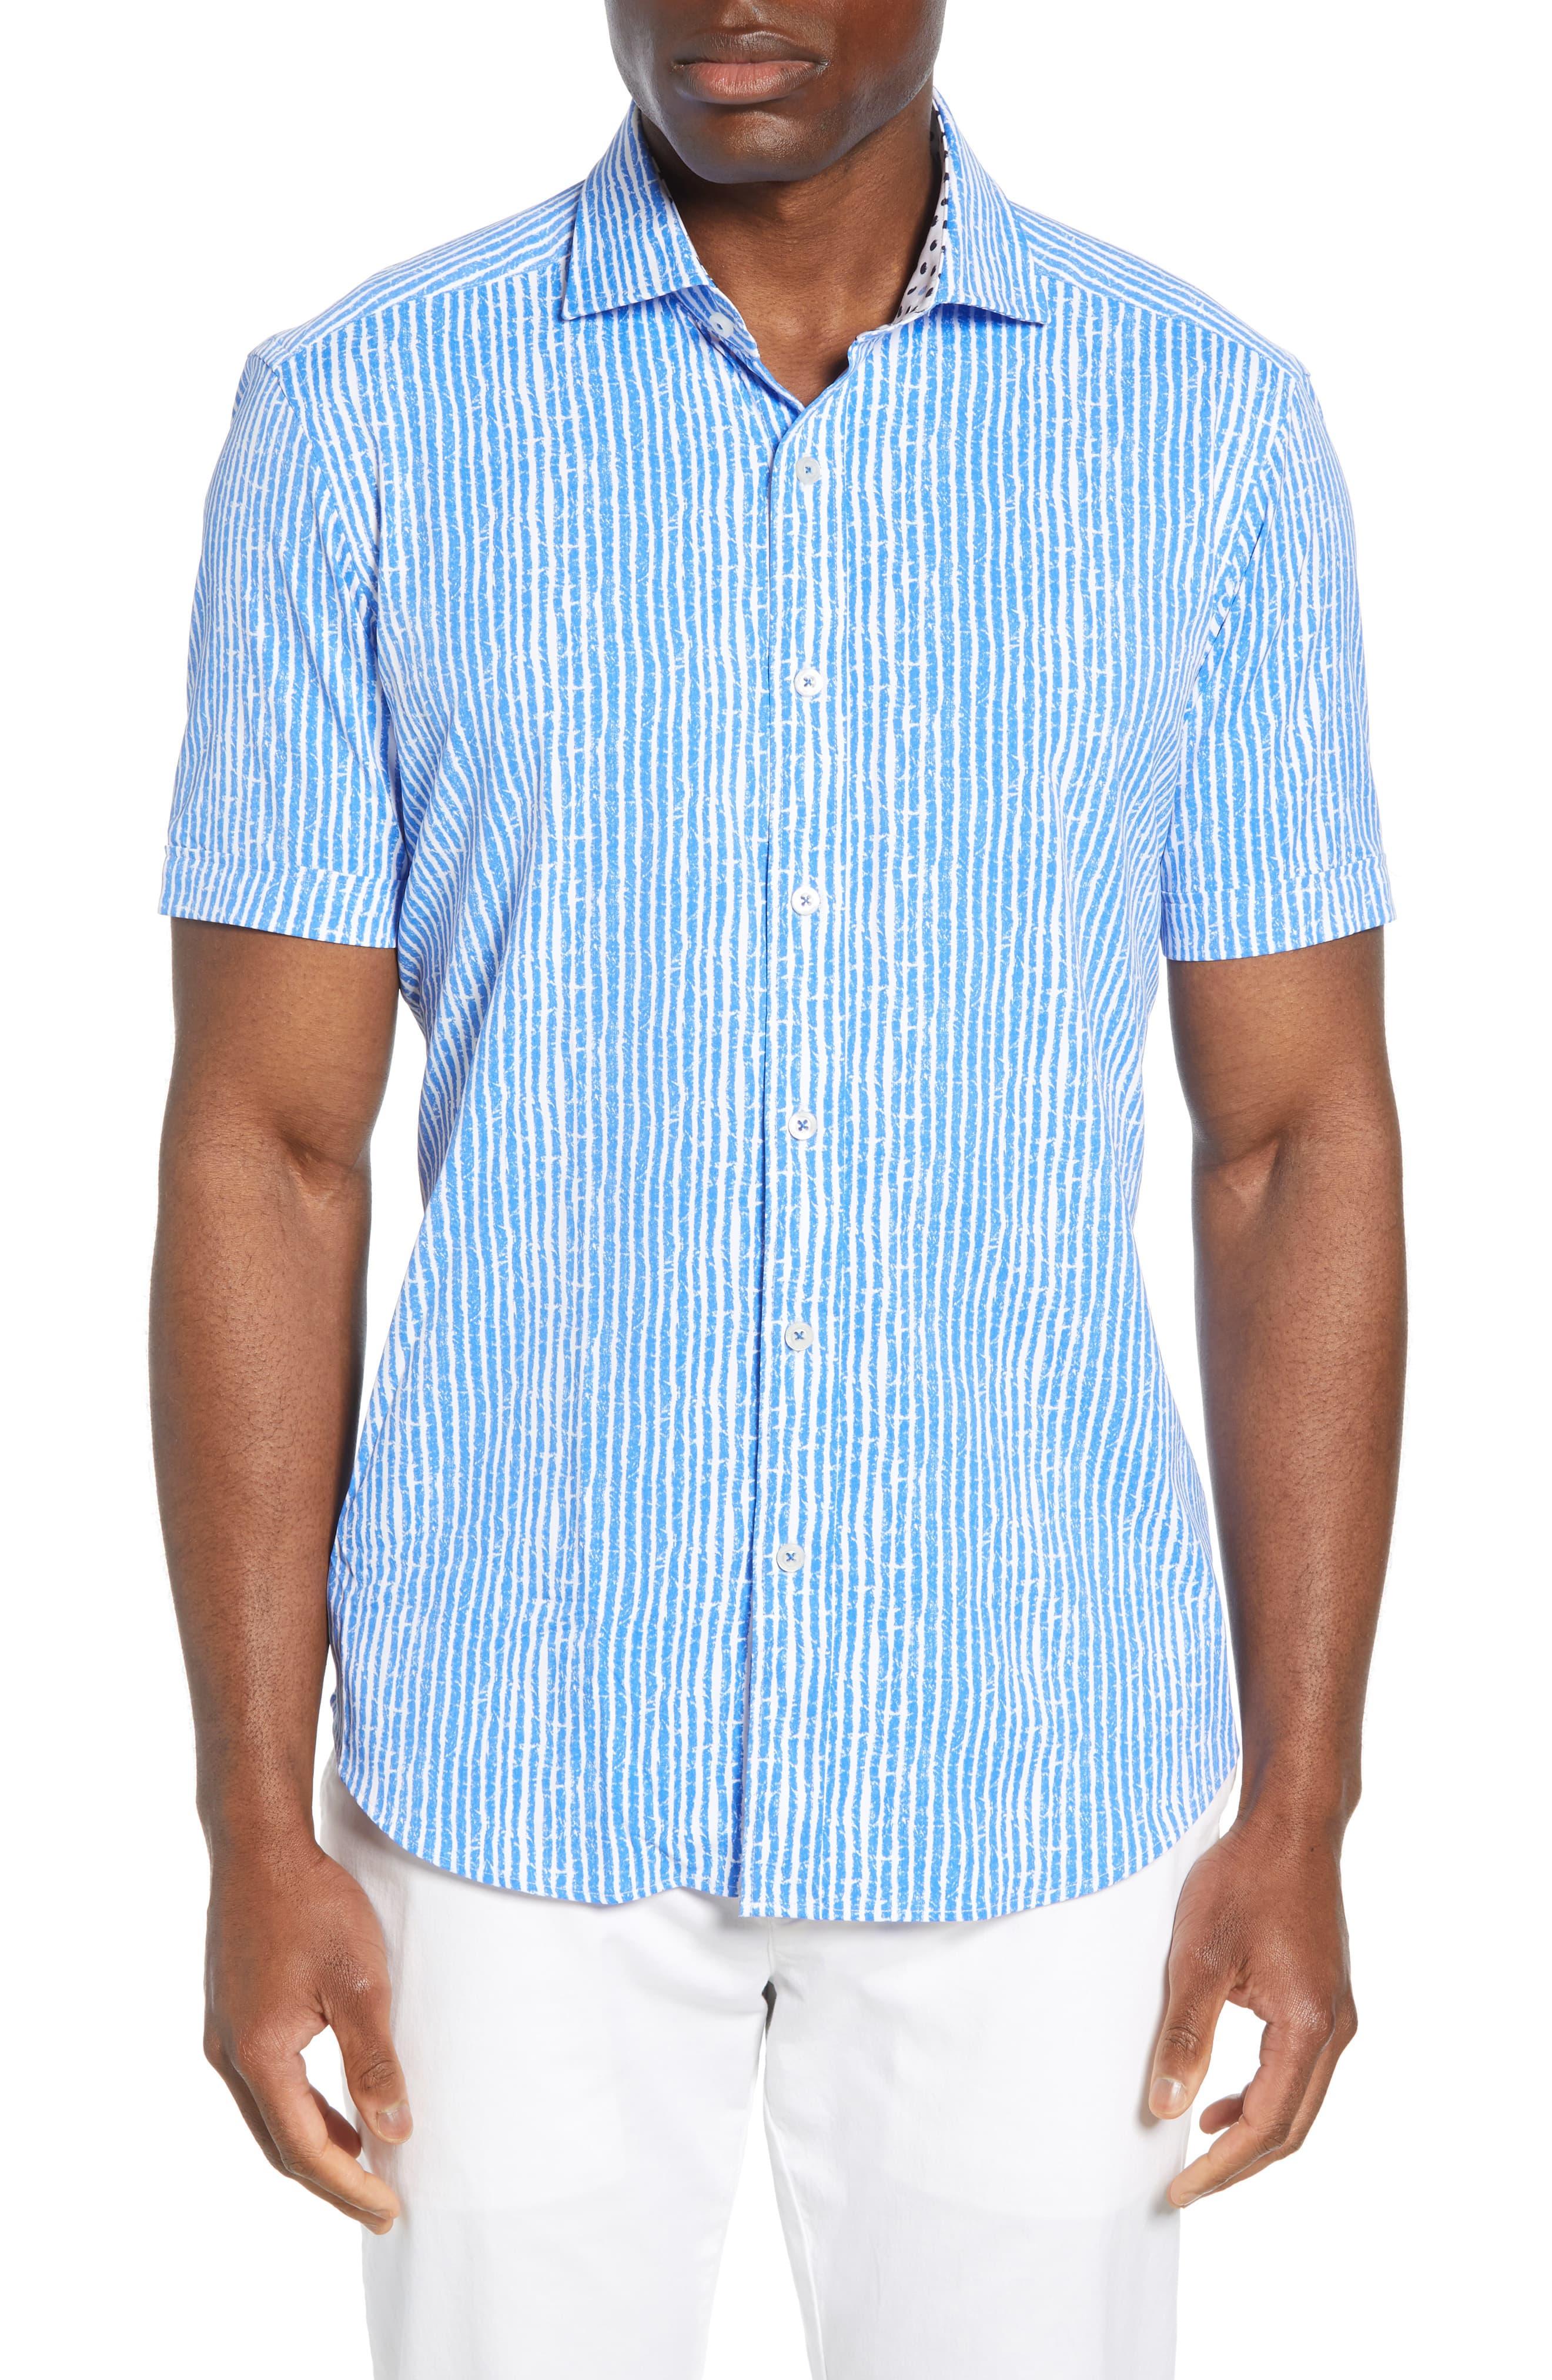 Bugatchi Shaped Fit Stripe Performance Sport Shirt in Blue for Men - Lyst